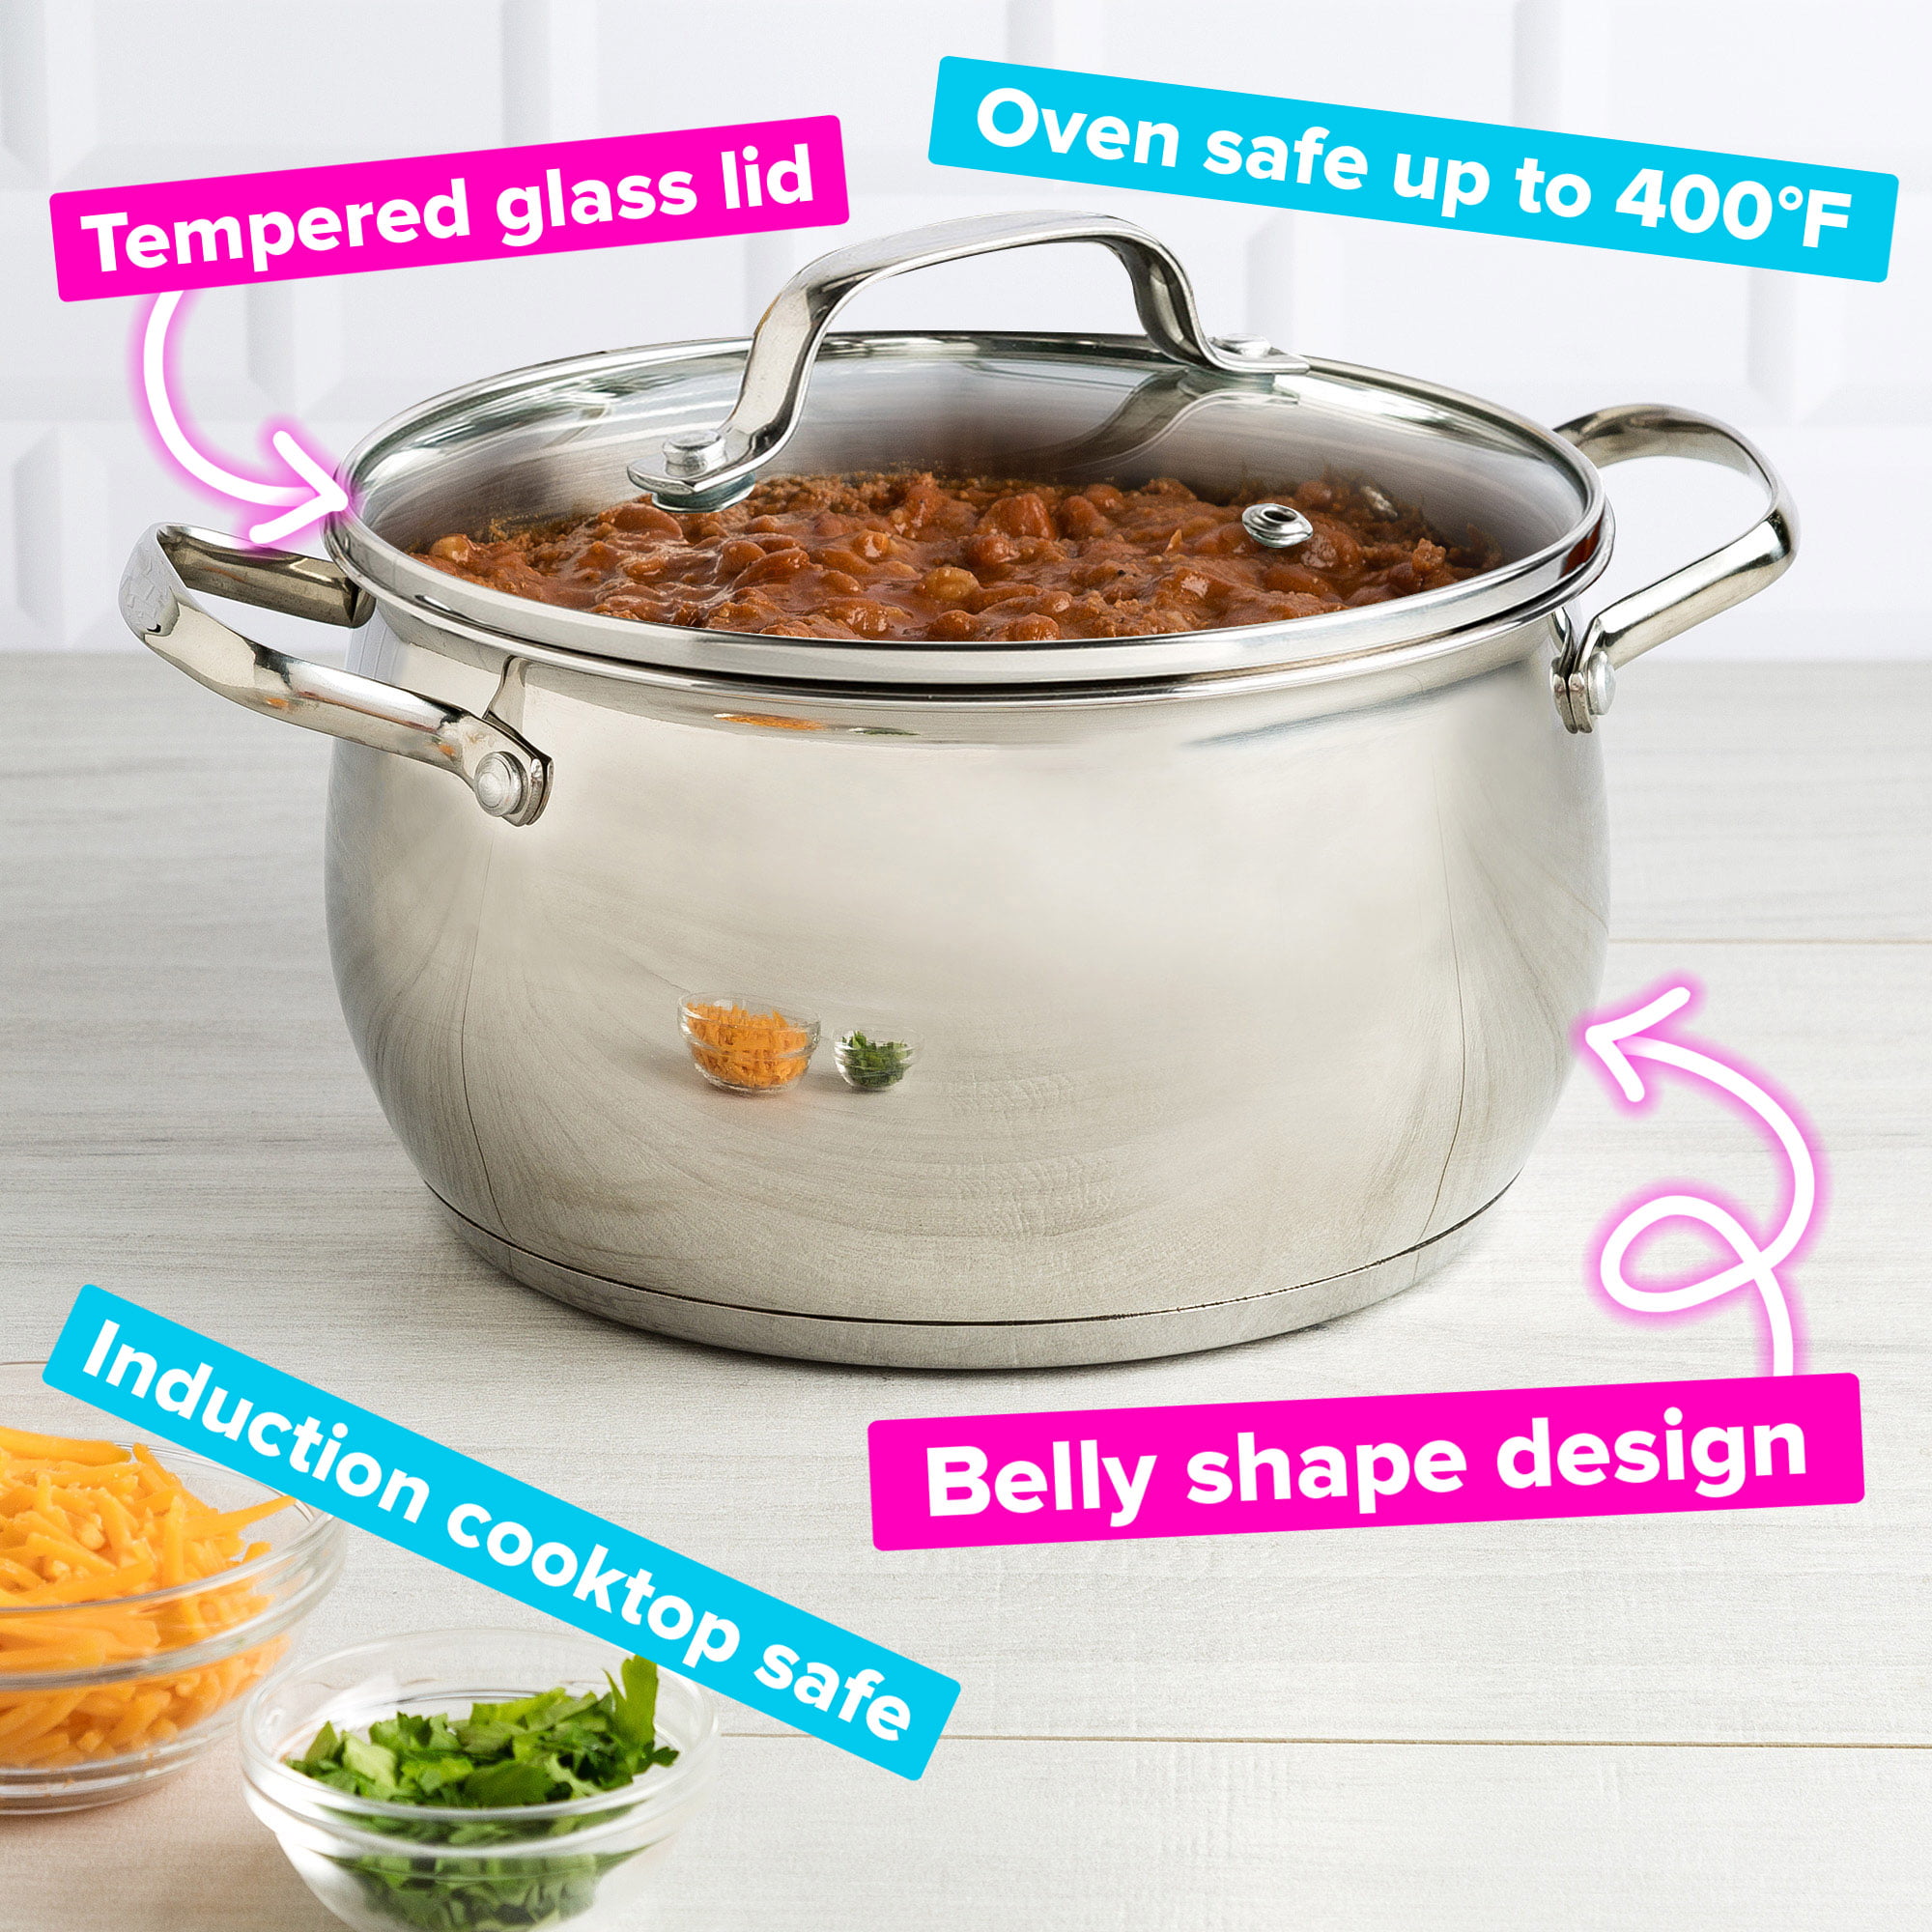 Tasty Stainless Steel Dutch Oven and Glass Lid, 5 Quart, Size: 5qt